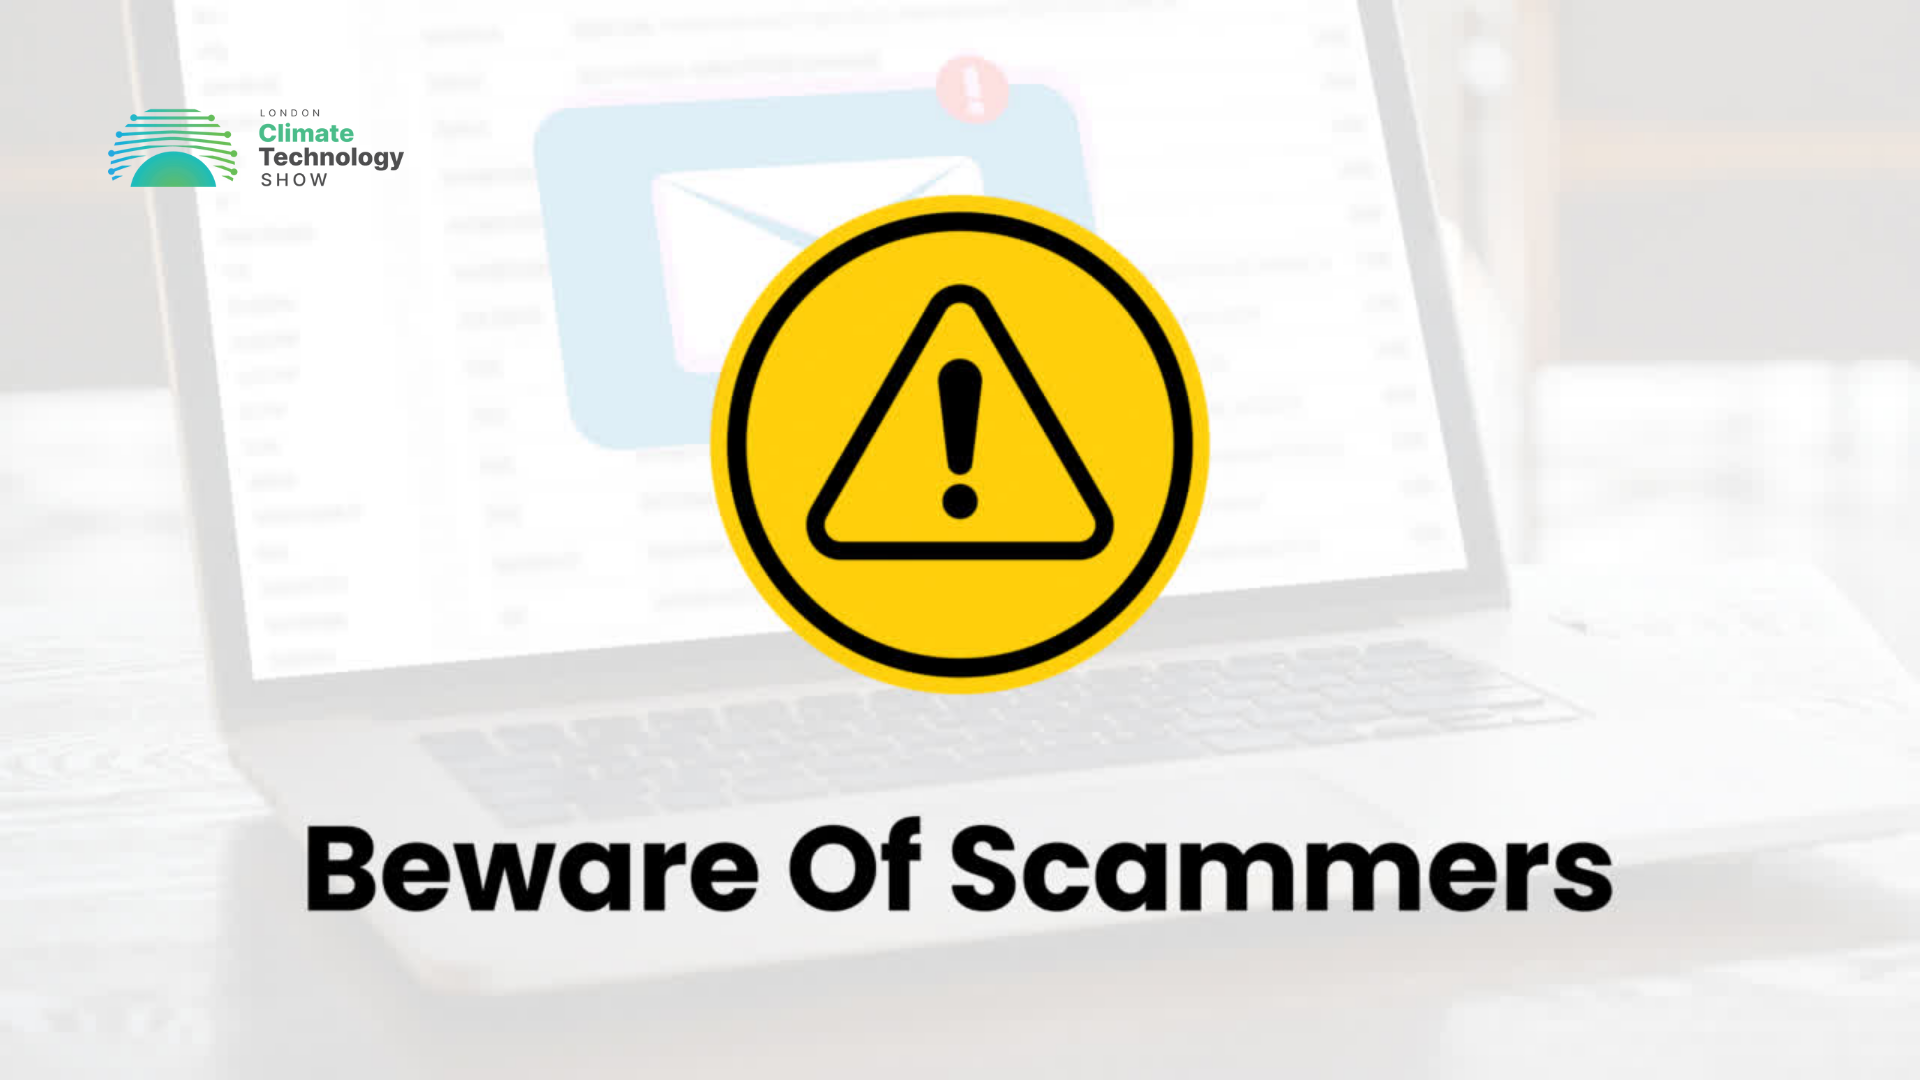 SCAM Alert: Beware Of Scammers Claiming To Be Associated With The London Climate Technology Show.